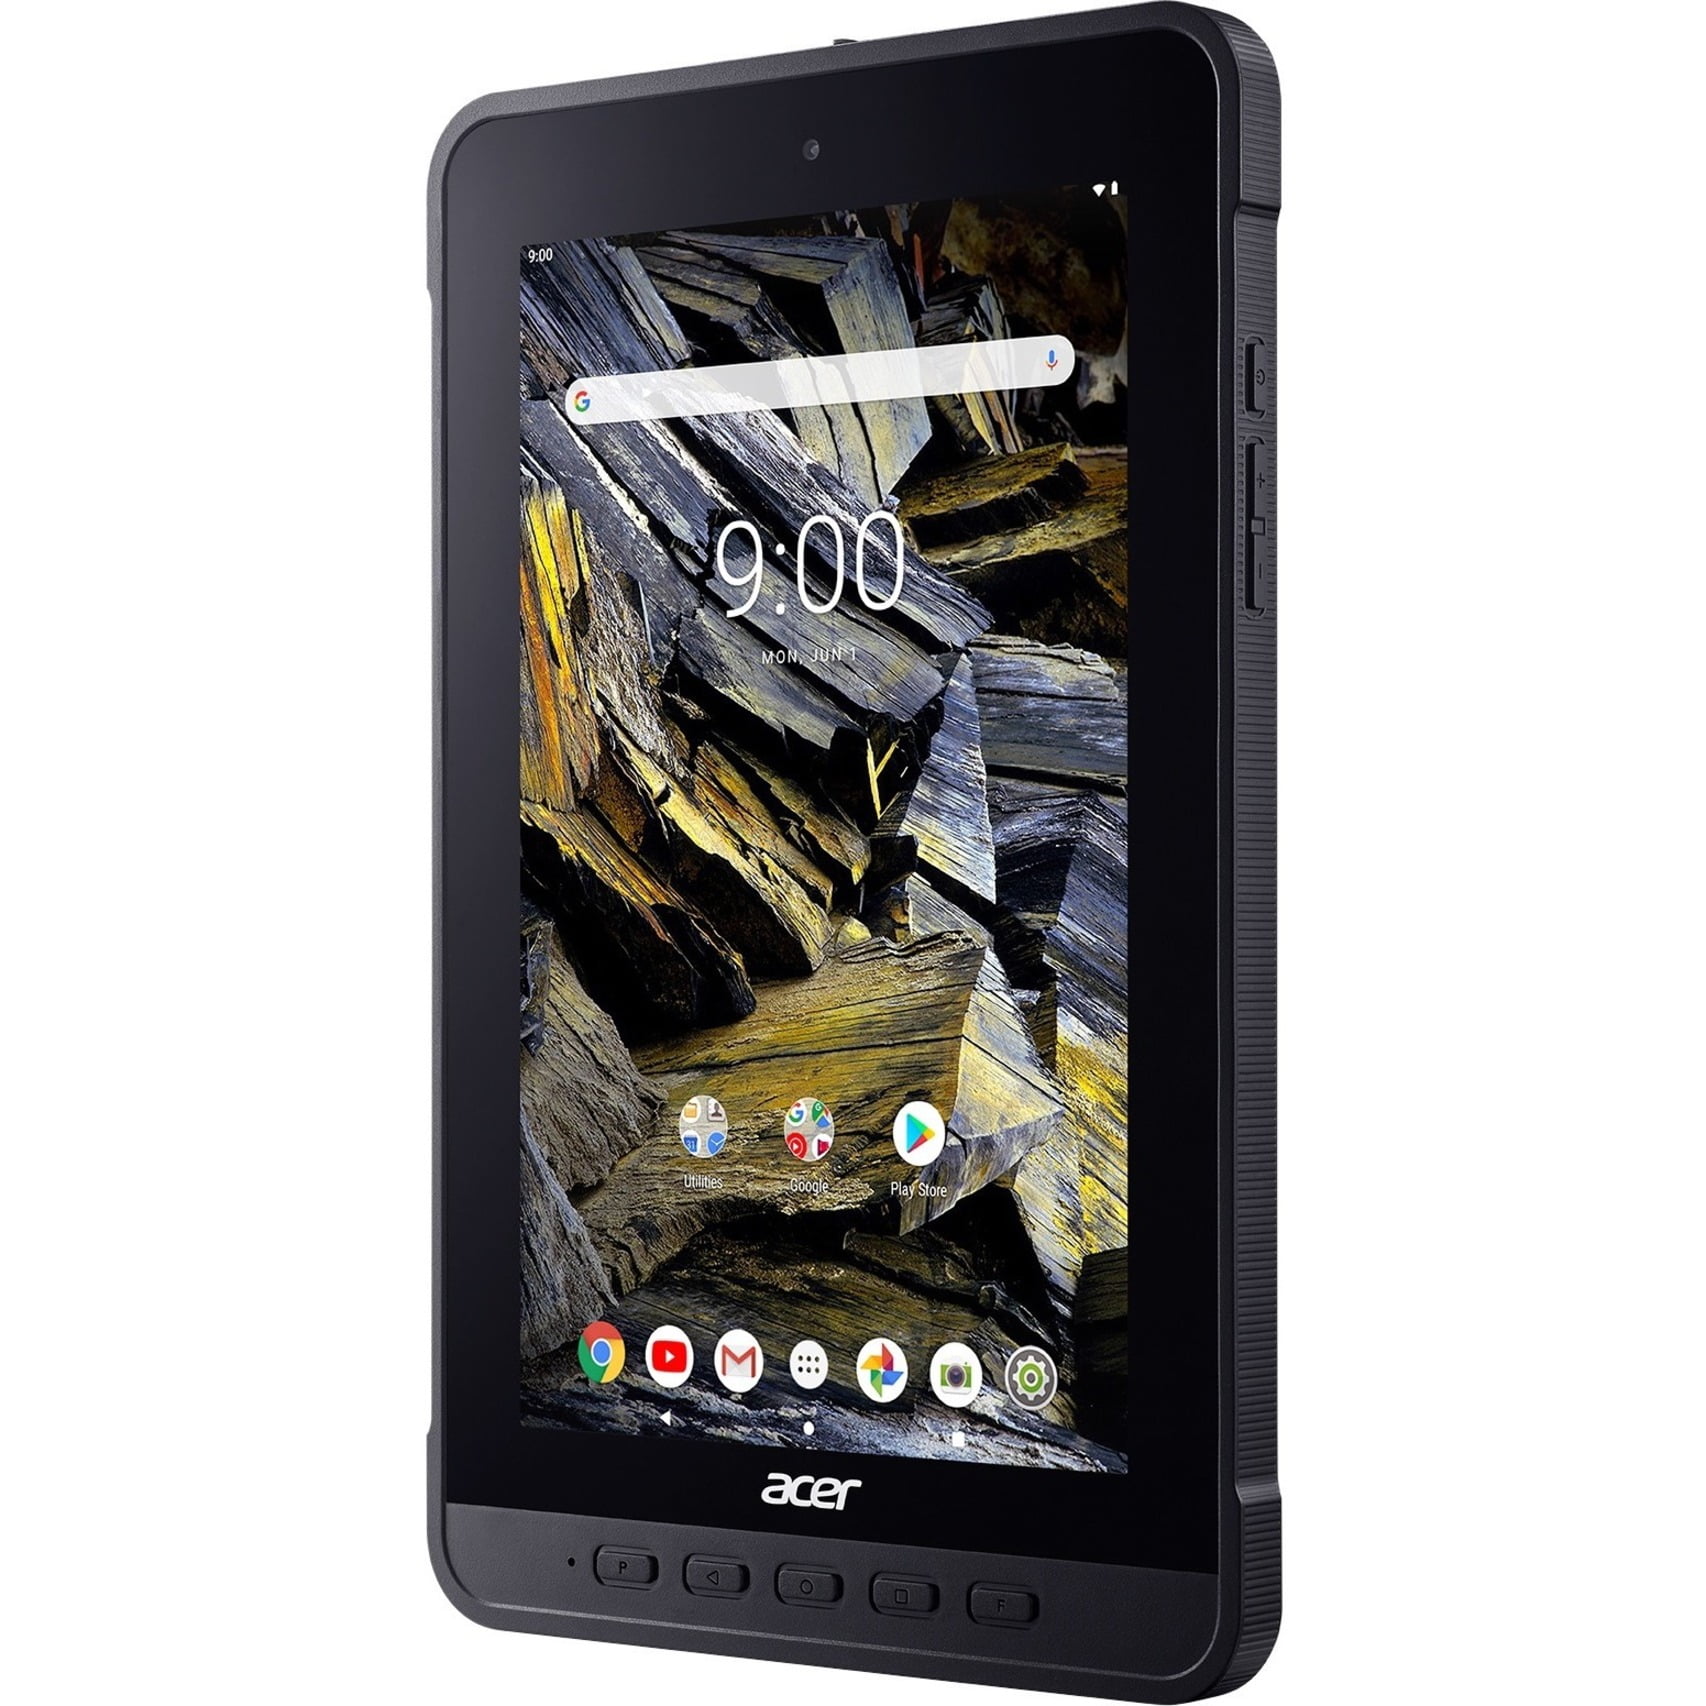 Picture of Acer NR.R0MAA.001 8 in. MT8385 4GB DDR4 64GB Windows 10 Pro Professional Tablet, Iron Gray